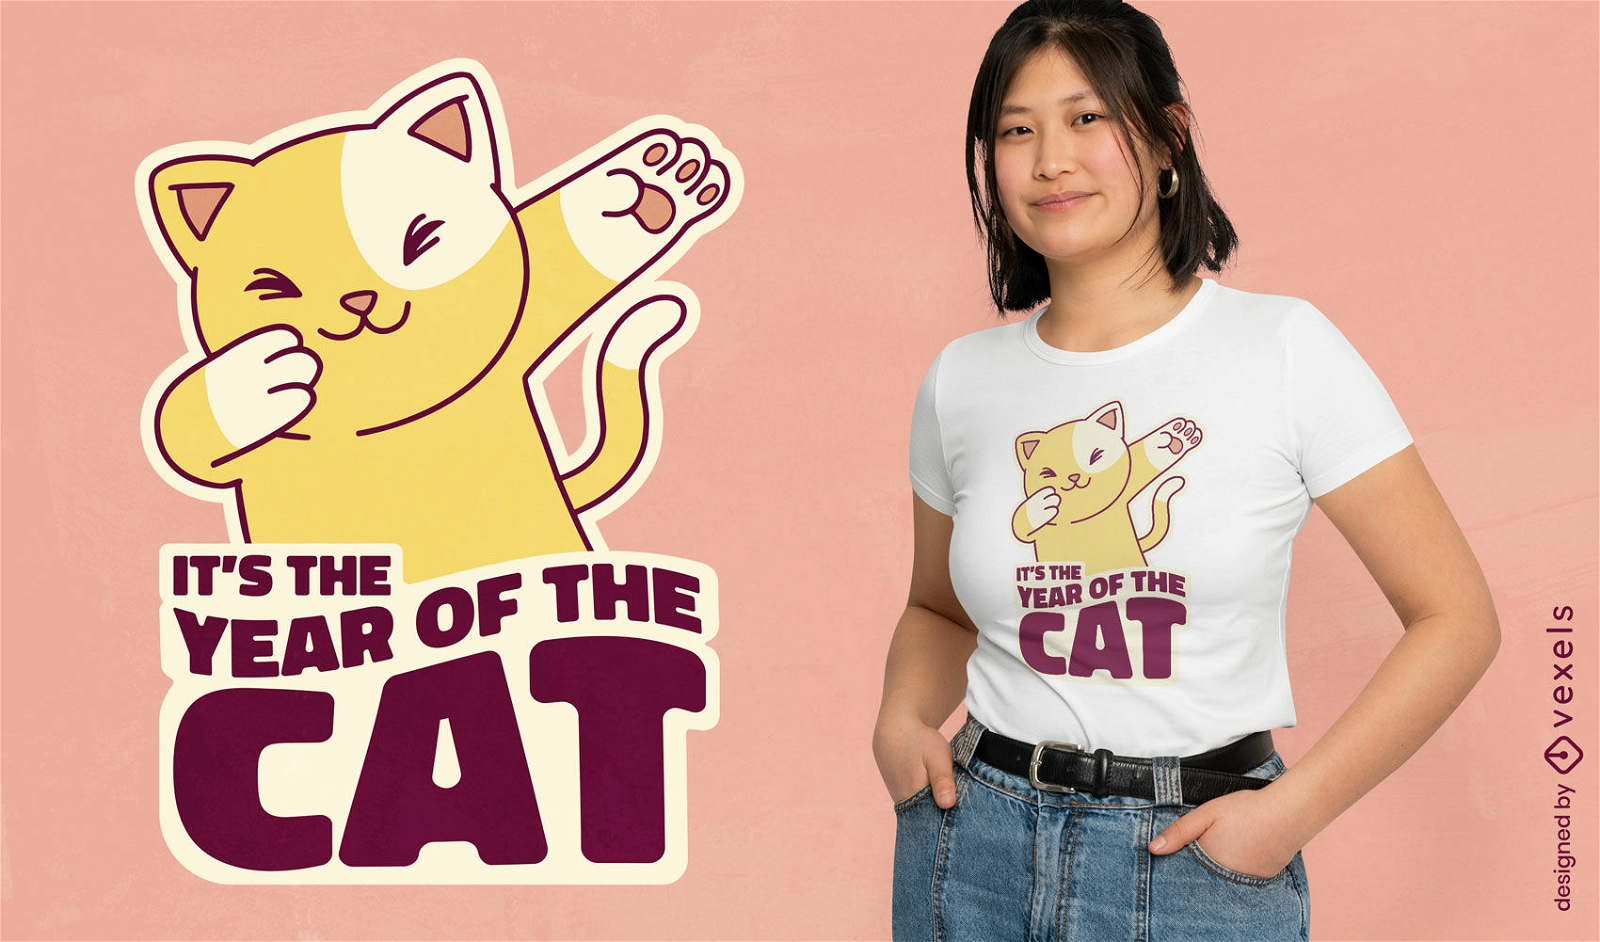 Year of the cat t-shirt design